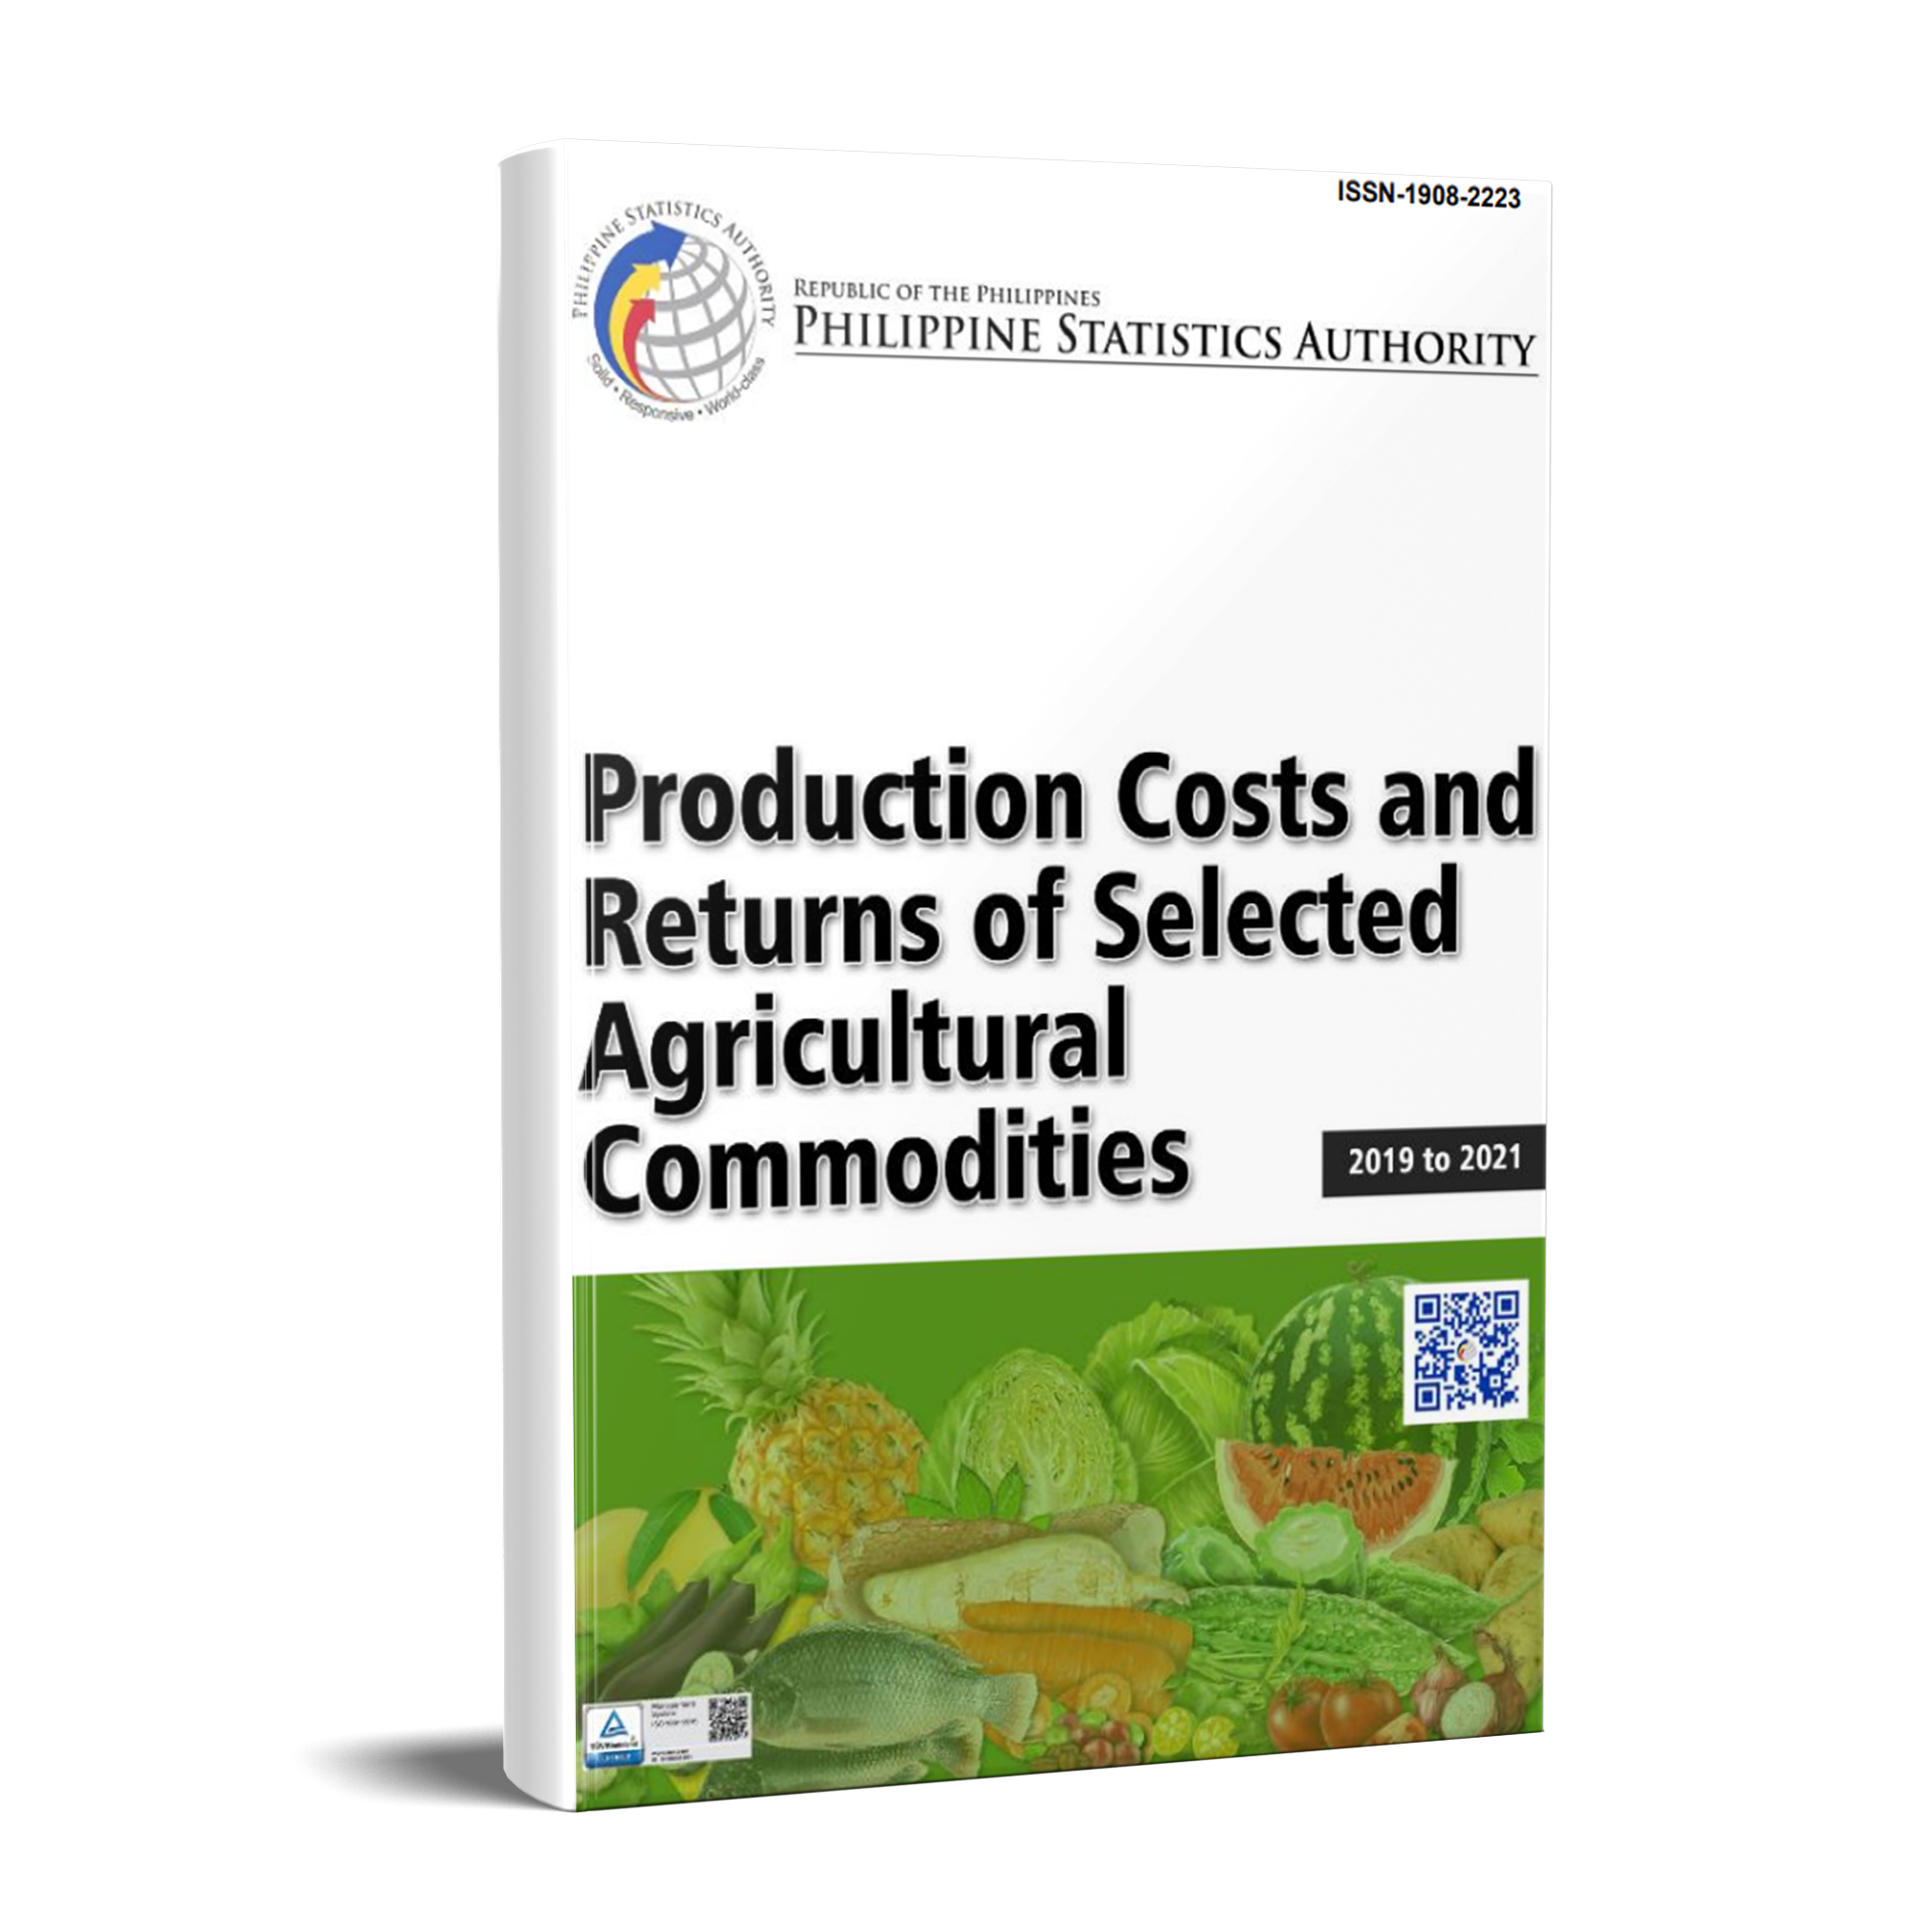 Production Costs and Returns of Selected Agricultural Commodities